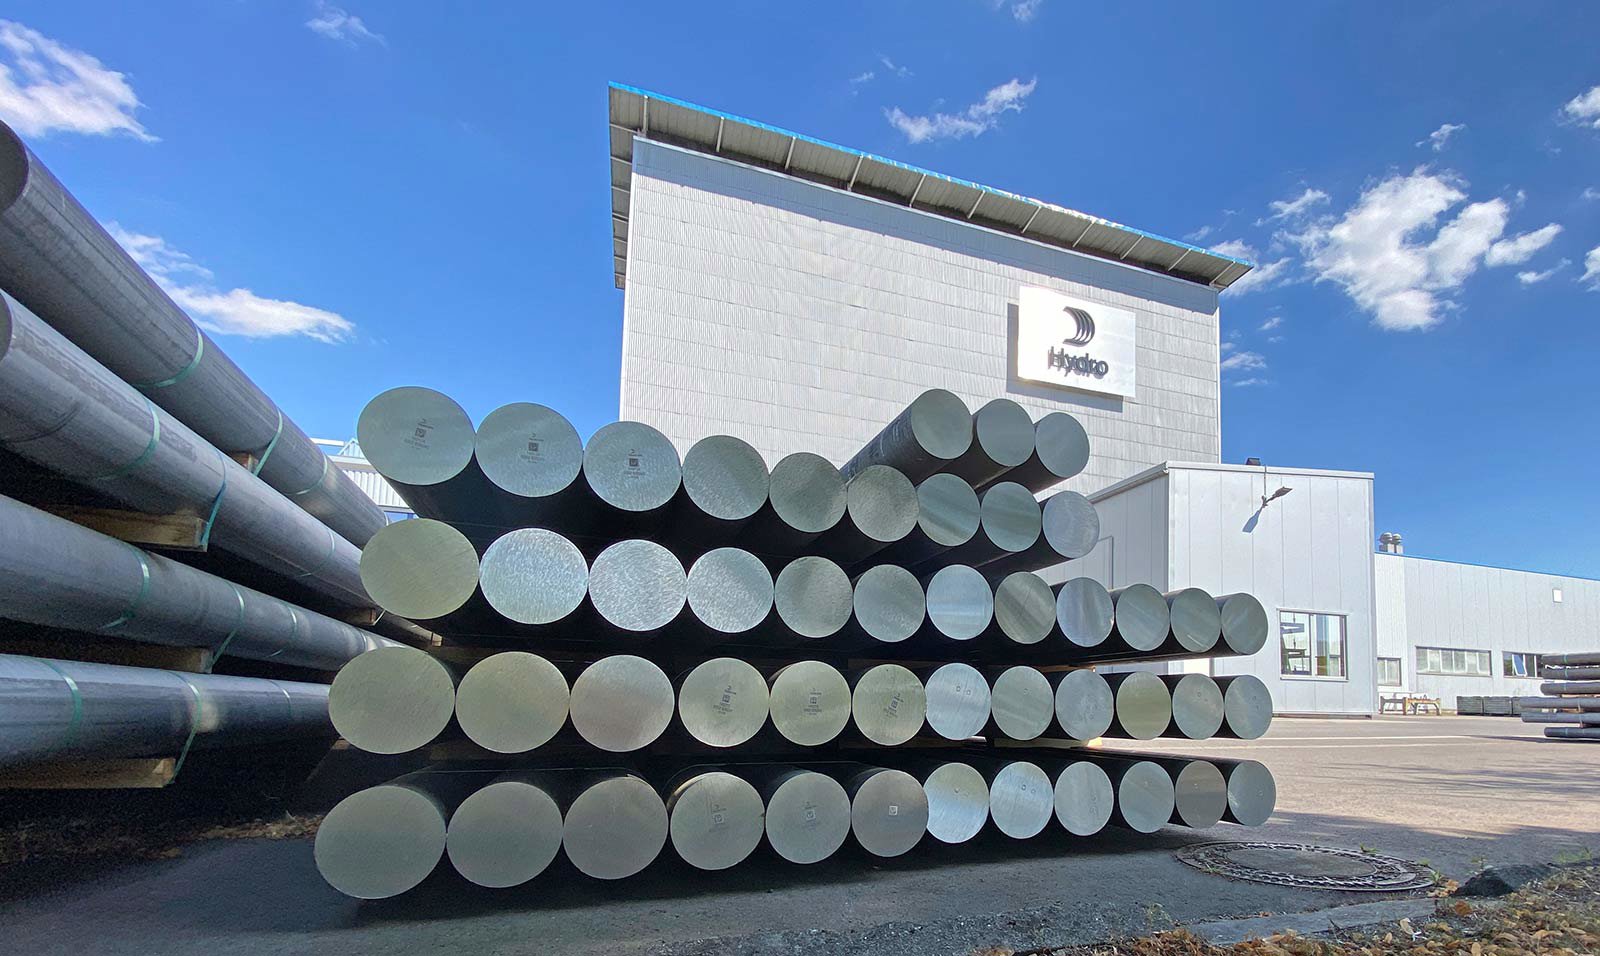 Aluminium billets ready for the production of extrusion profiles at Hydro's Rackwitz plant